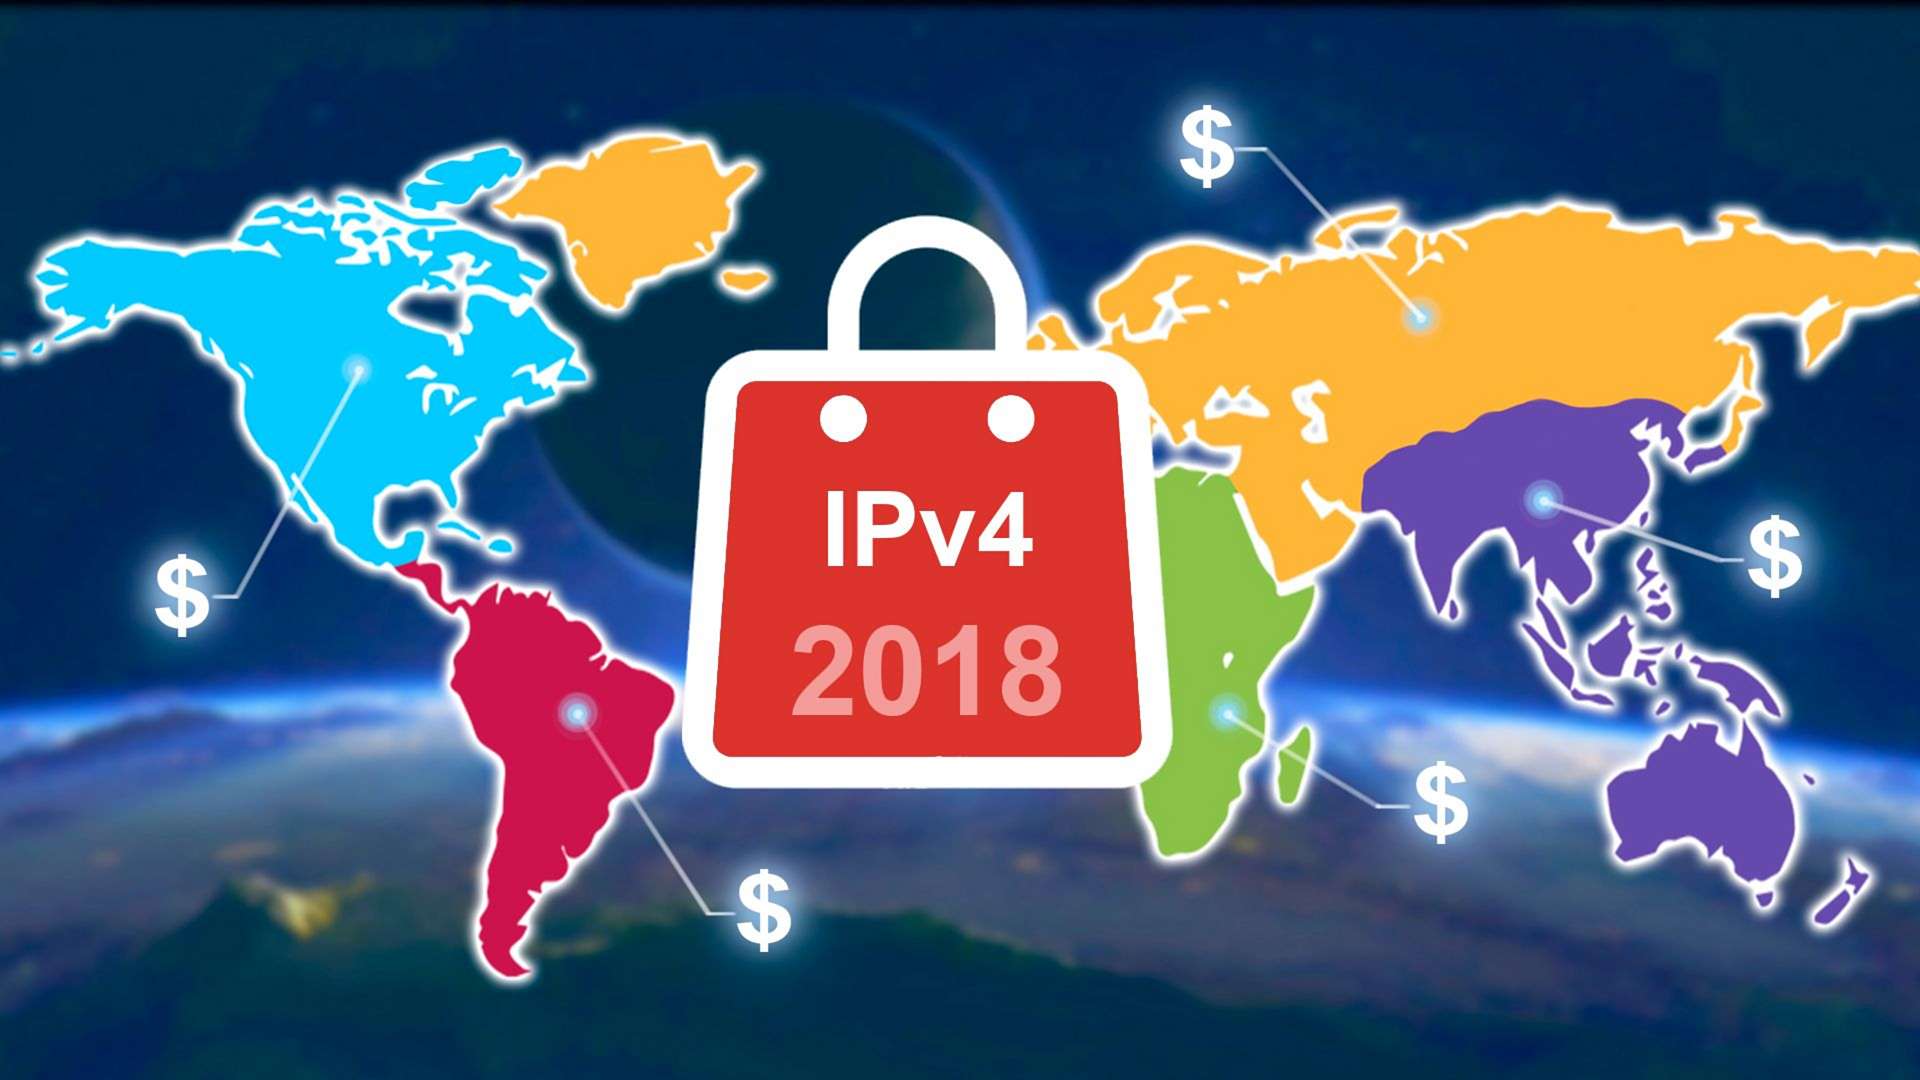 Market prices for IPv4 ranges in 2018